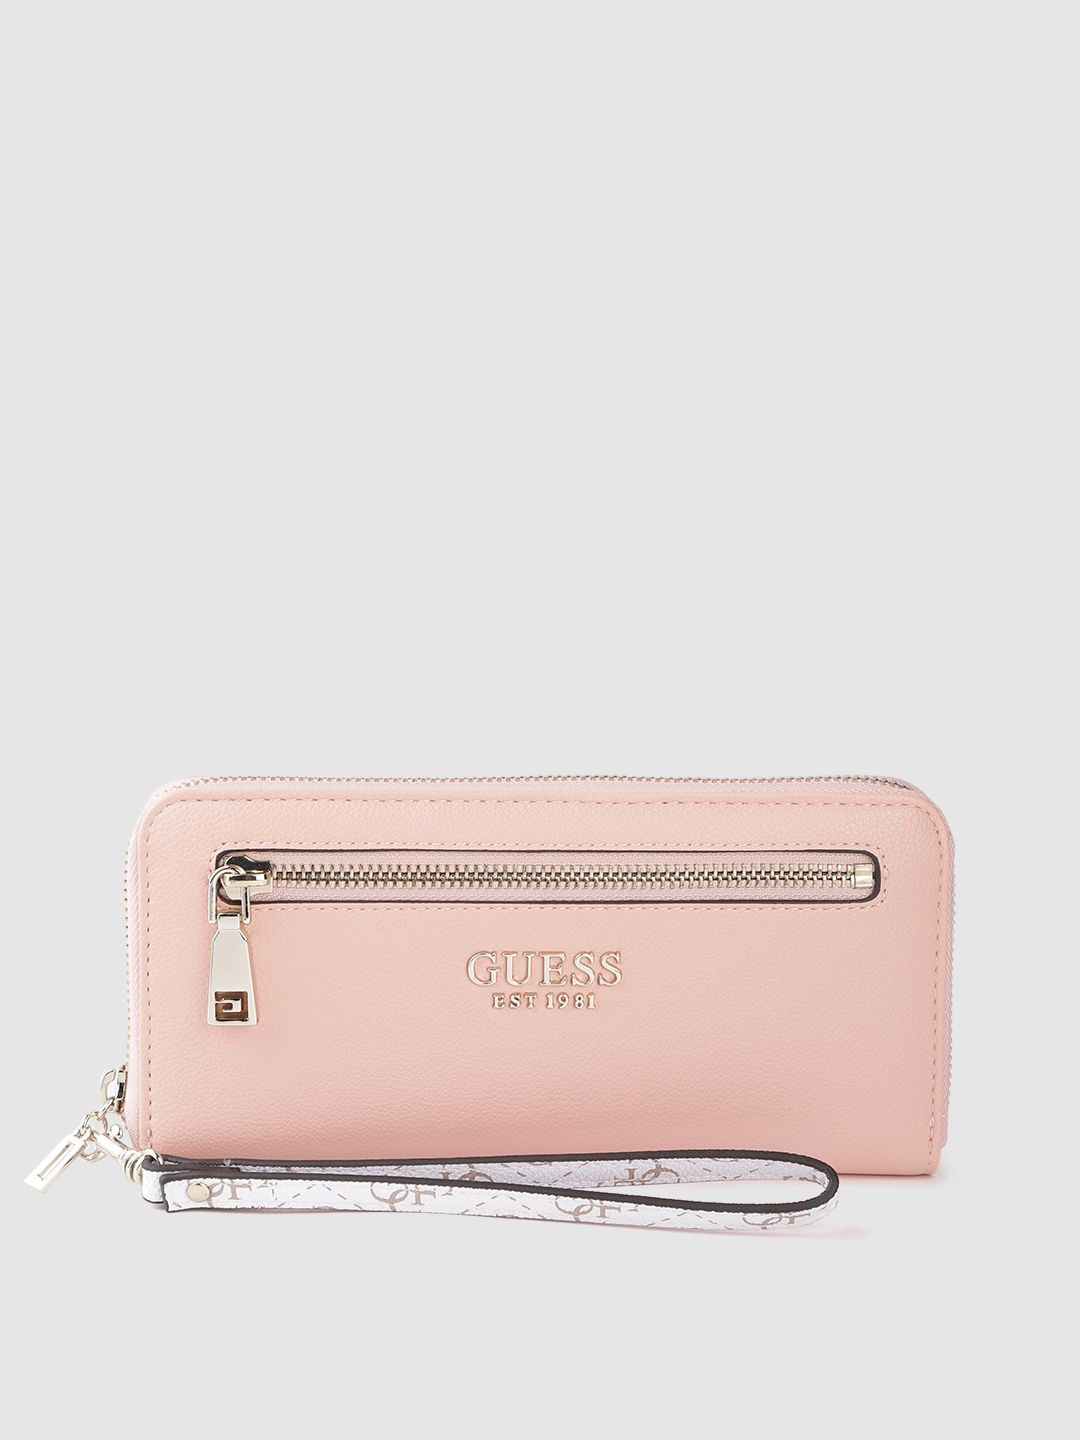 GUESS Women Pink & Gold-Toned PU Zip Around Wallet Price in India